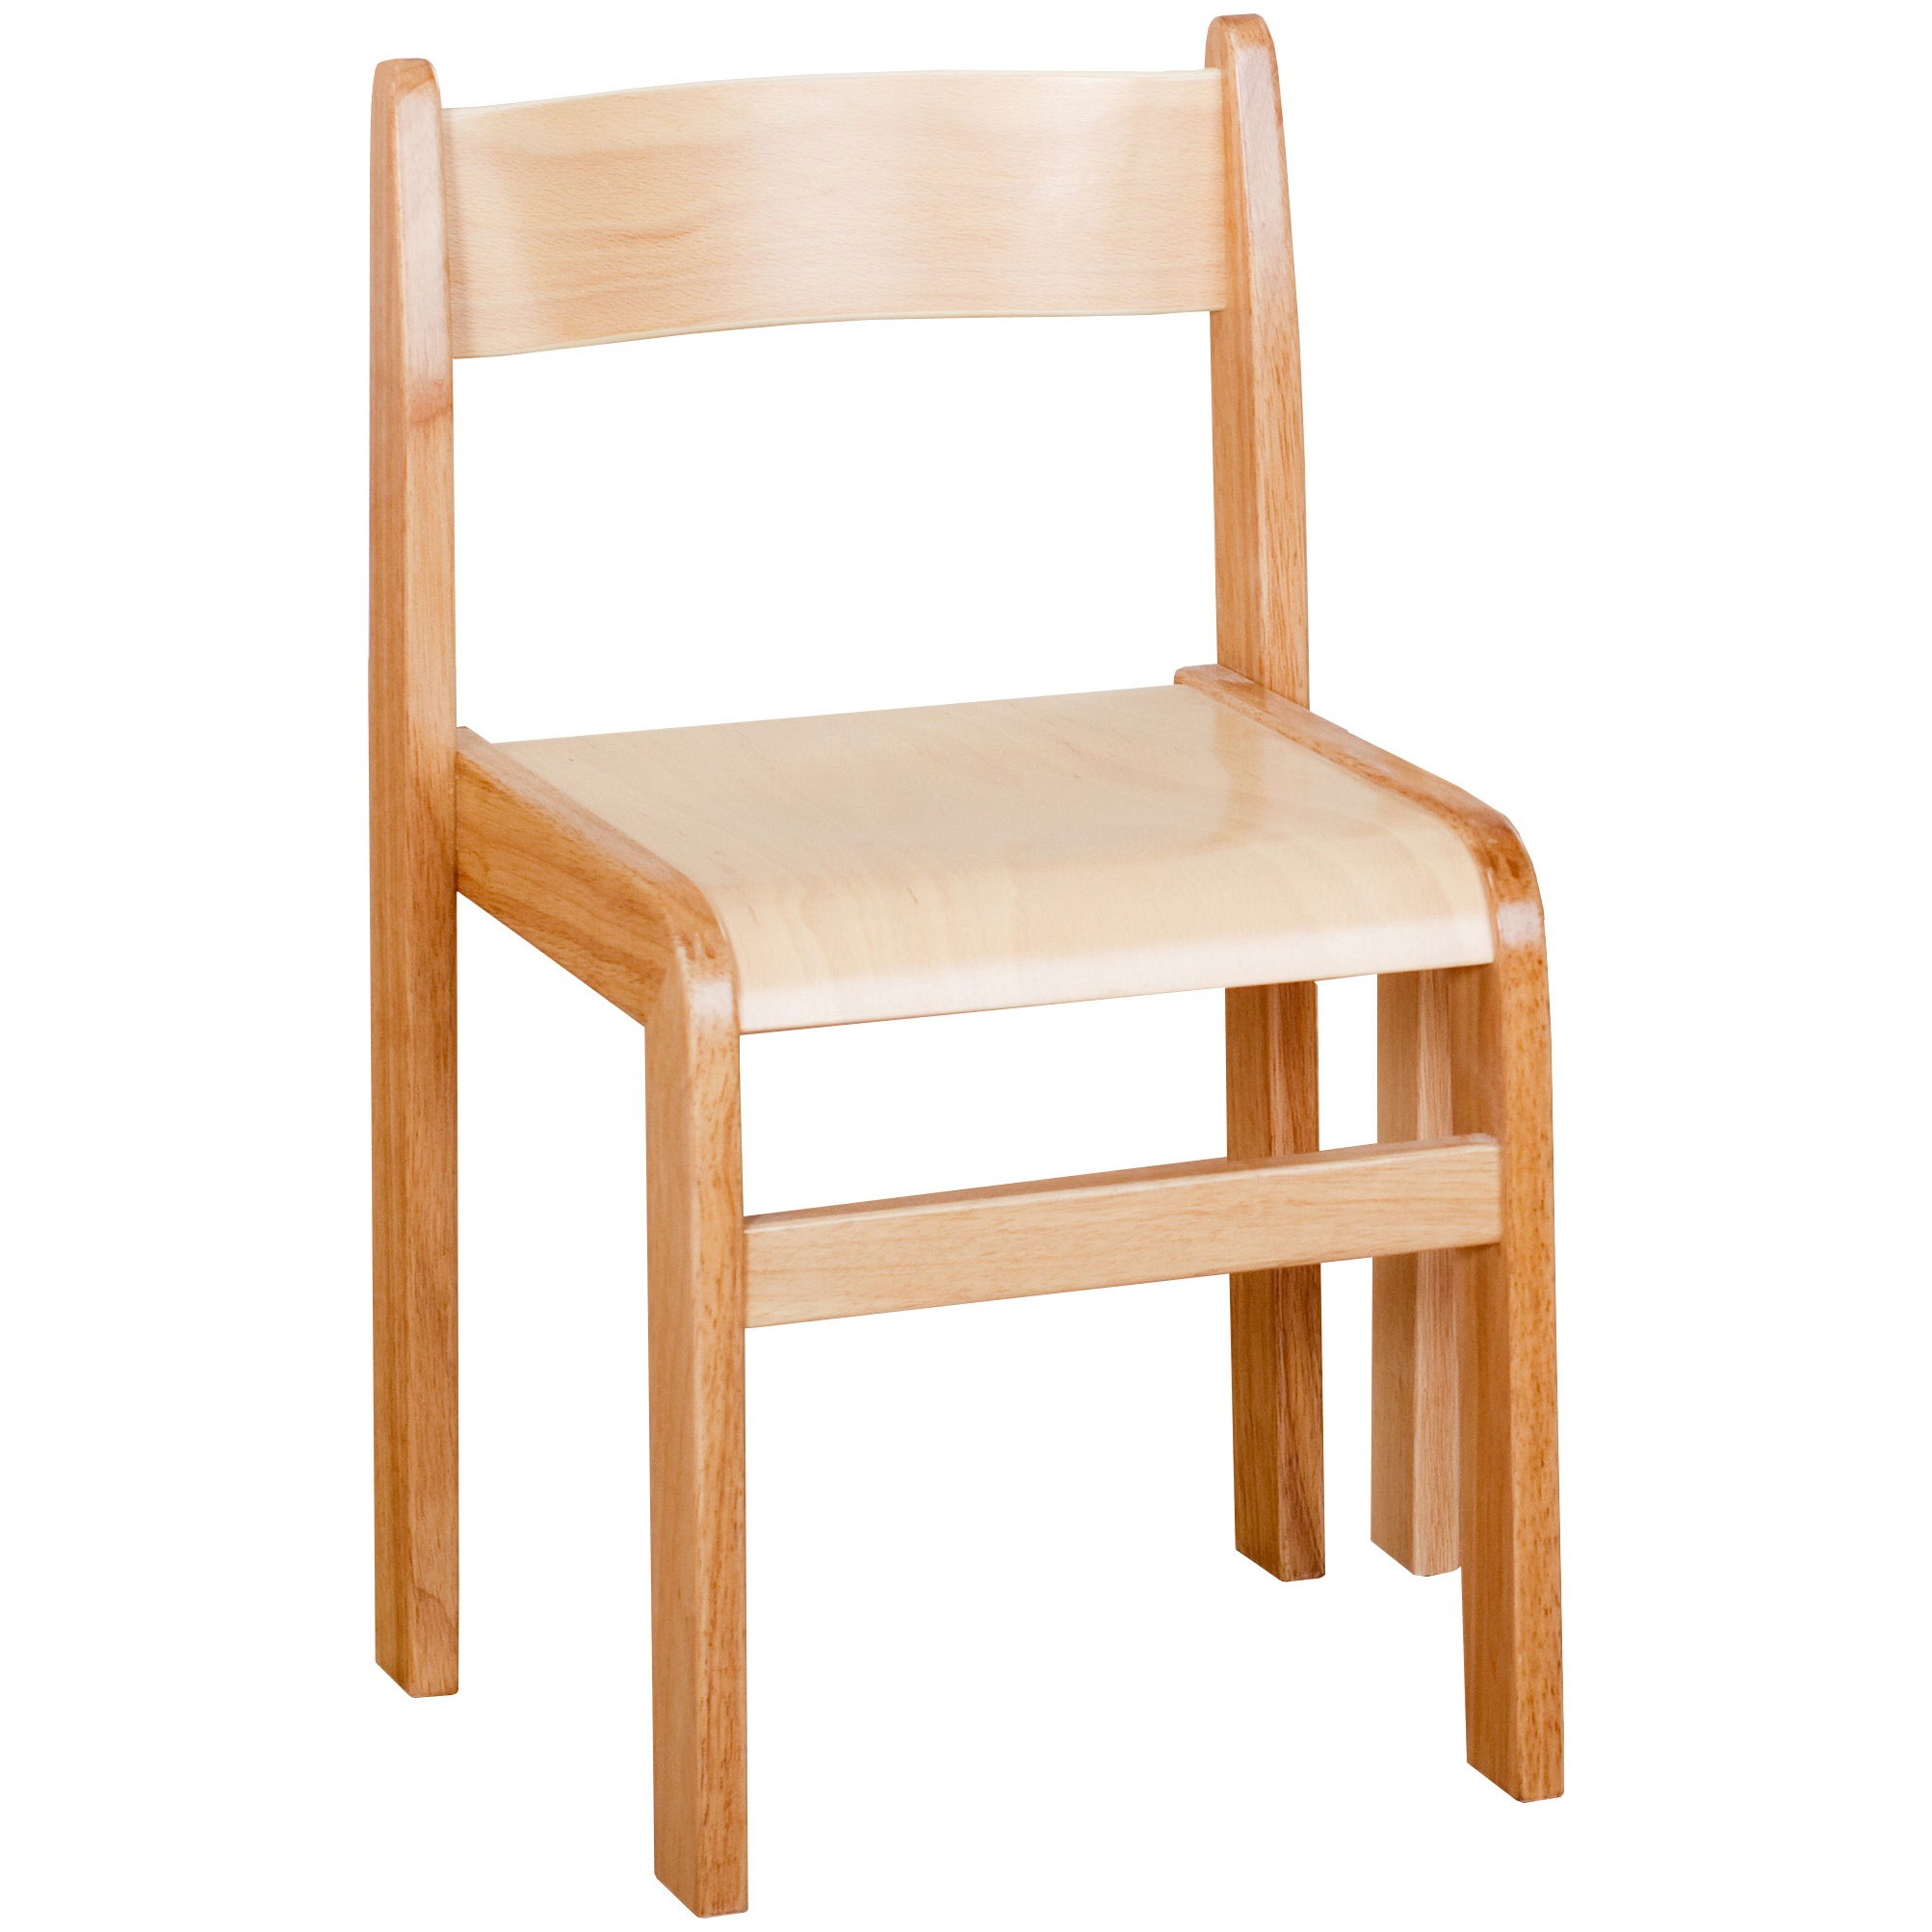 Wooden chair. Стул3681. Stacking Chair. Chair from Wood.